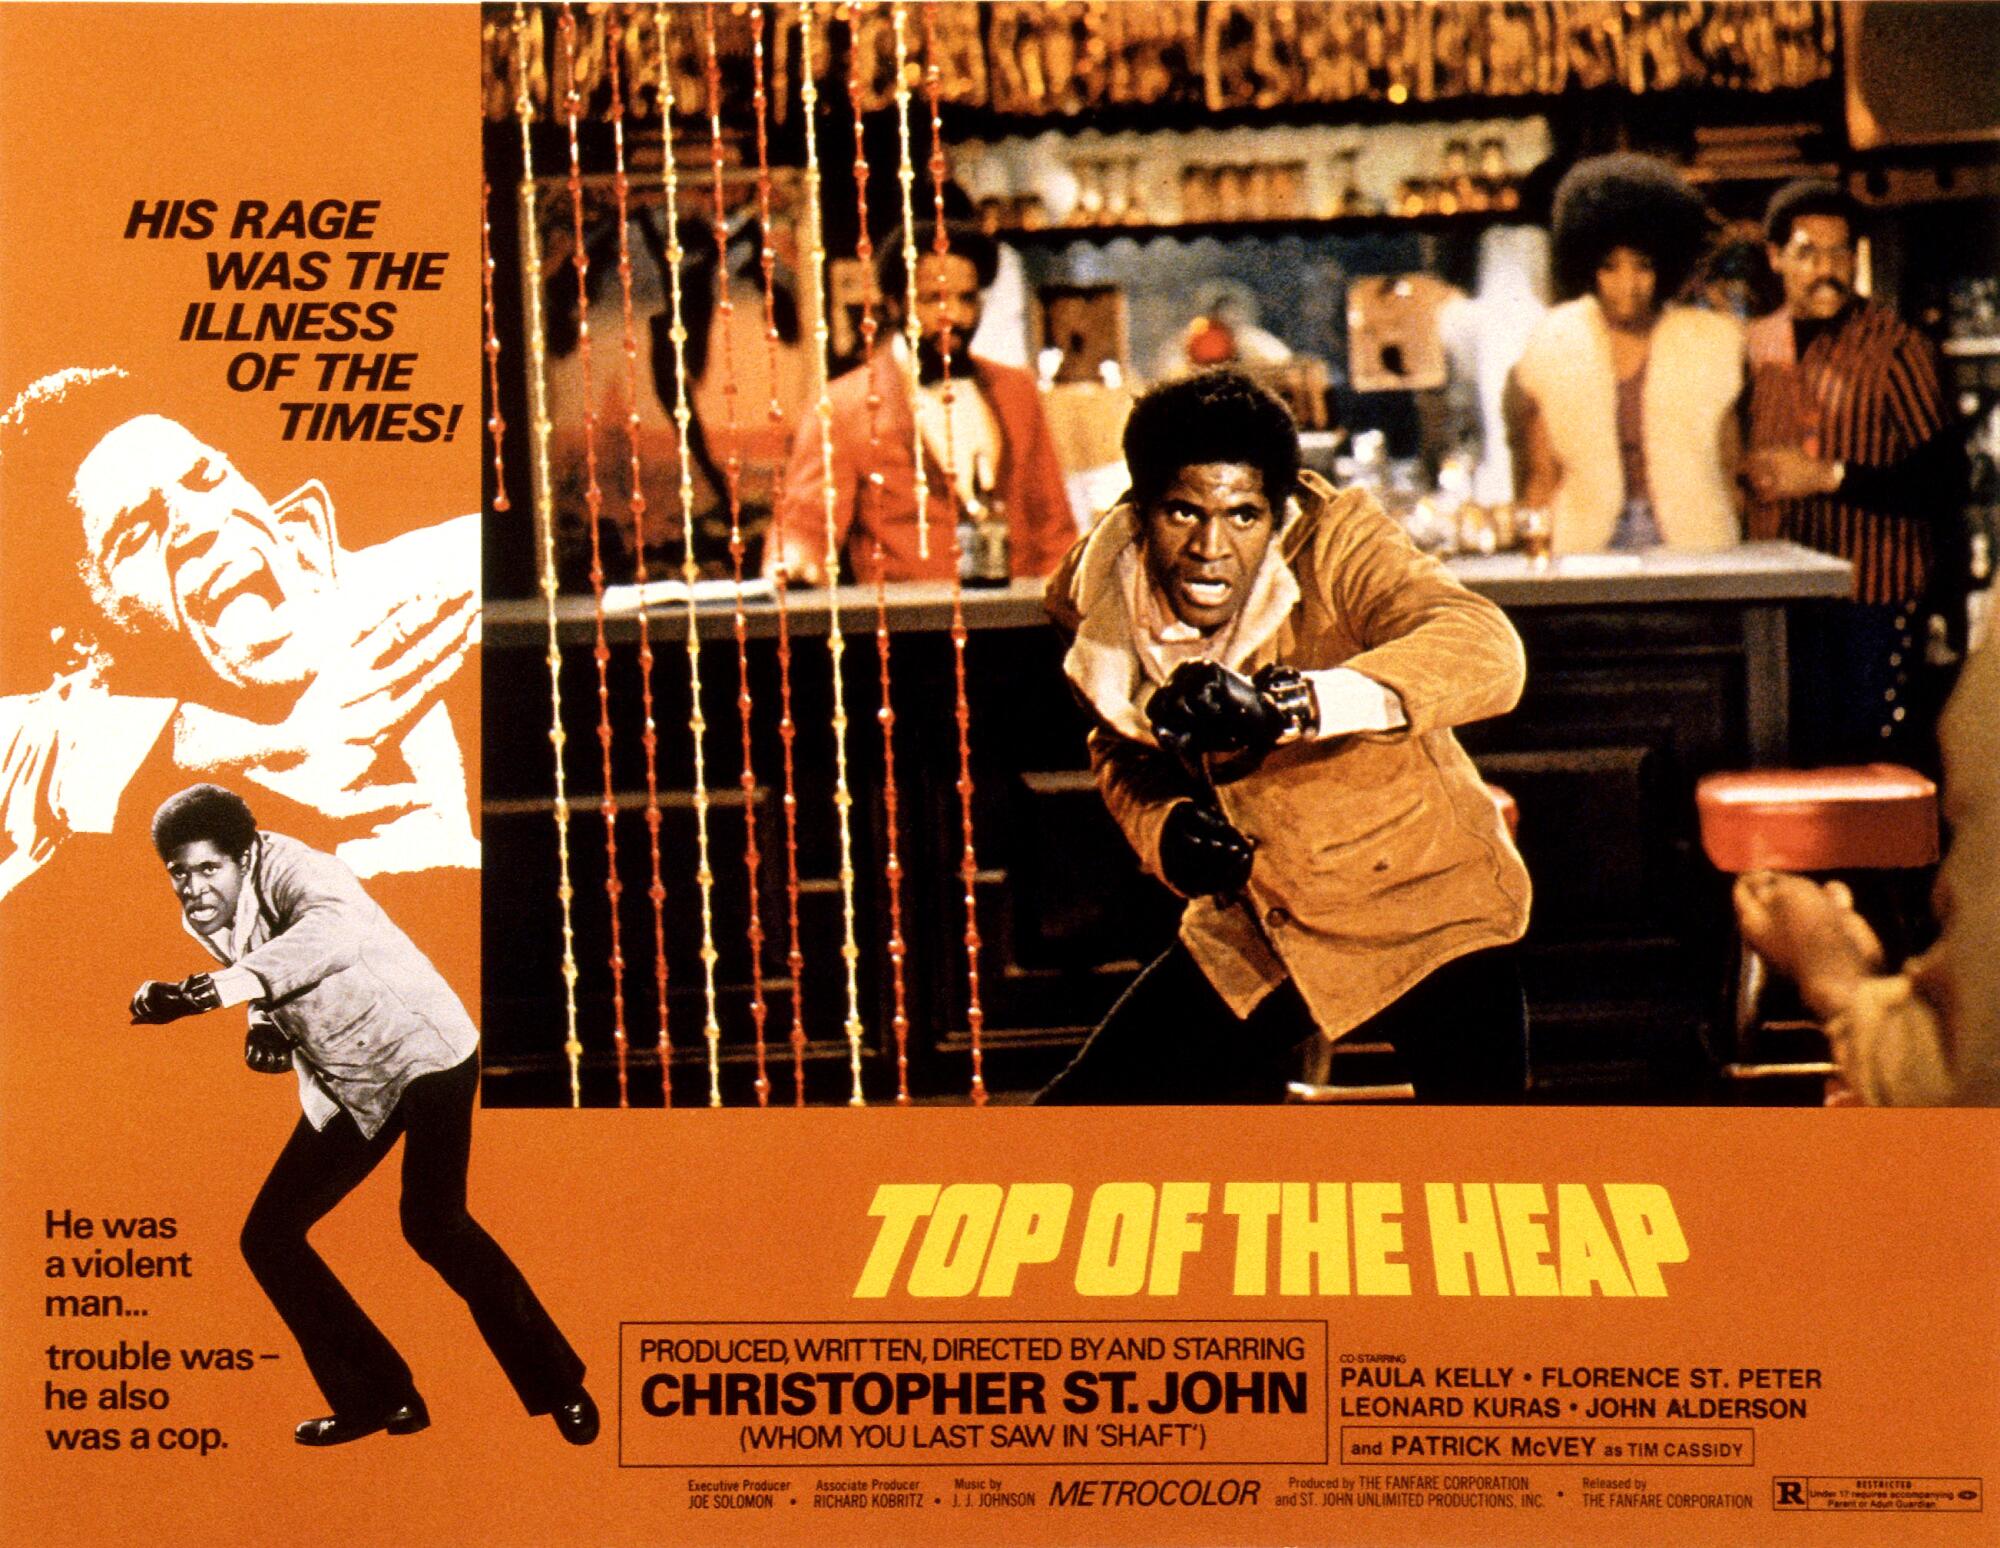 A poster for 1972's “Top Of The Heap” directed by and starring Christopher St. John.